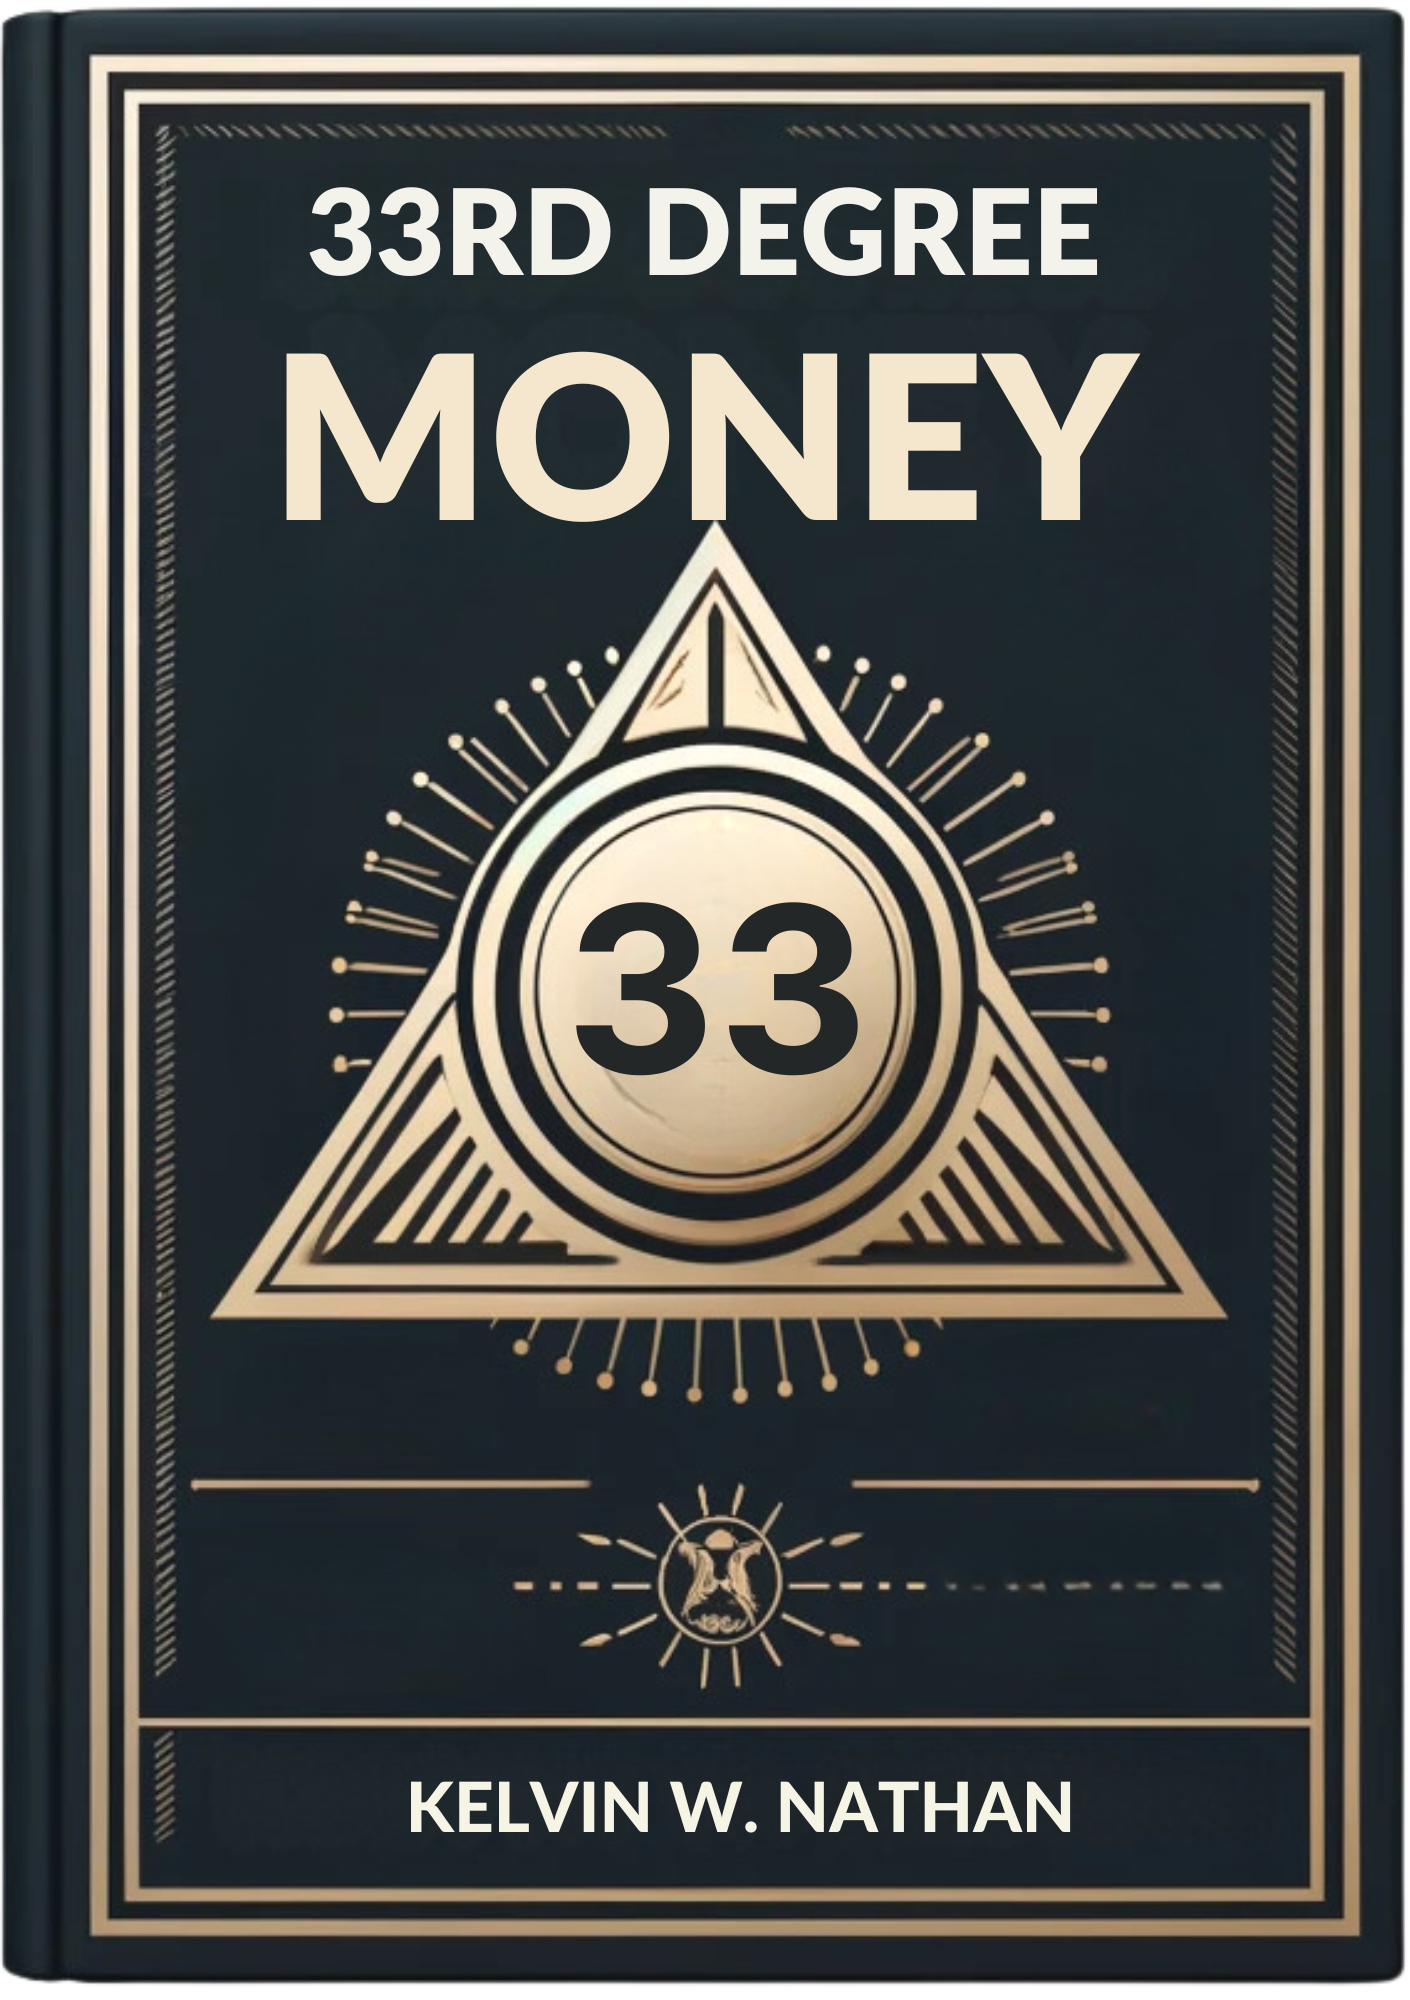 33rd Degree Money: How to Mentally Control the Money Energy